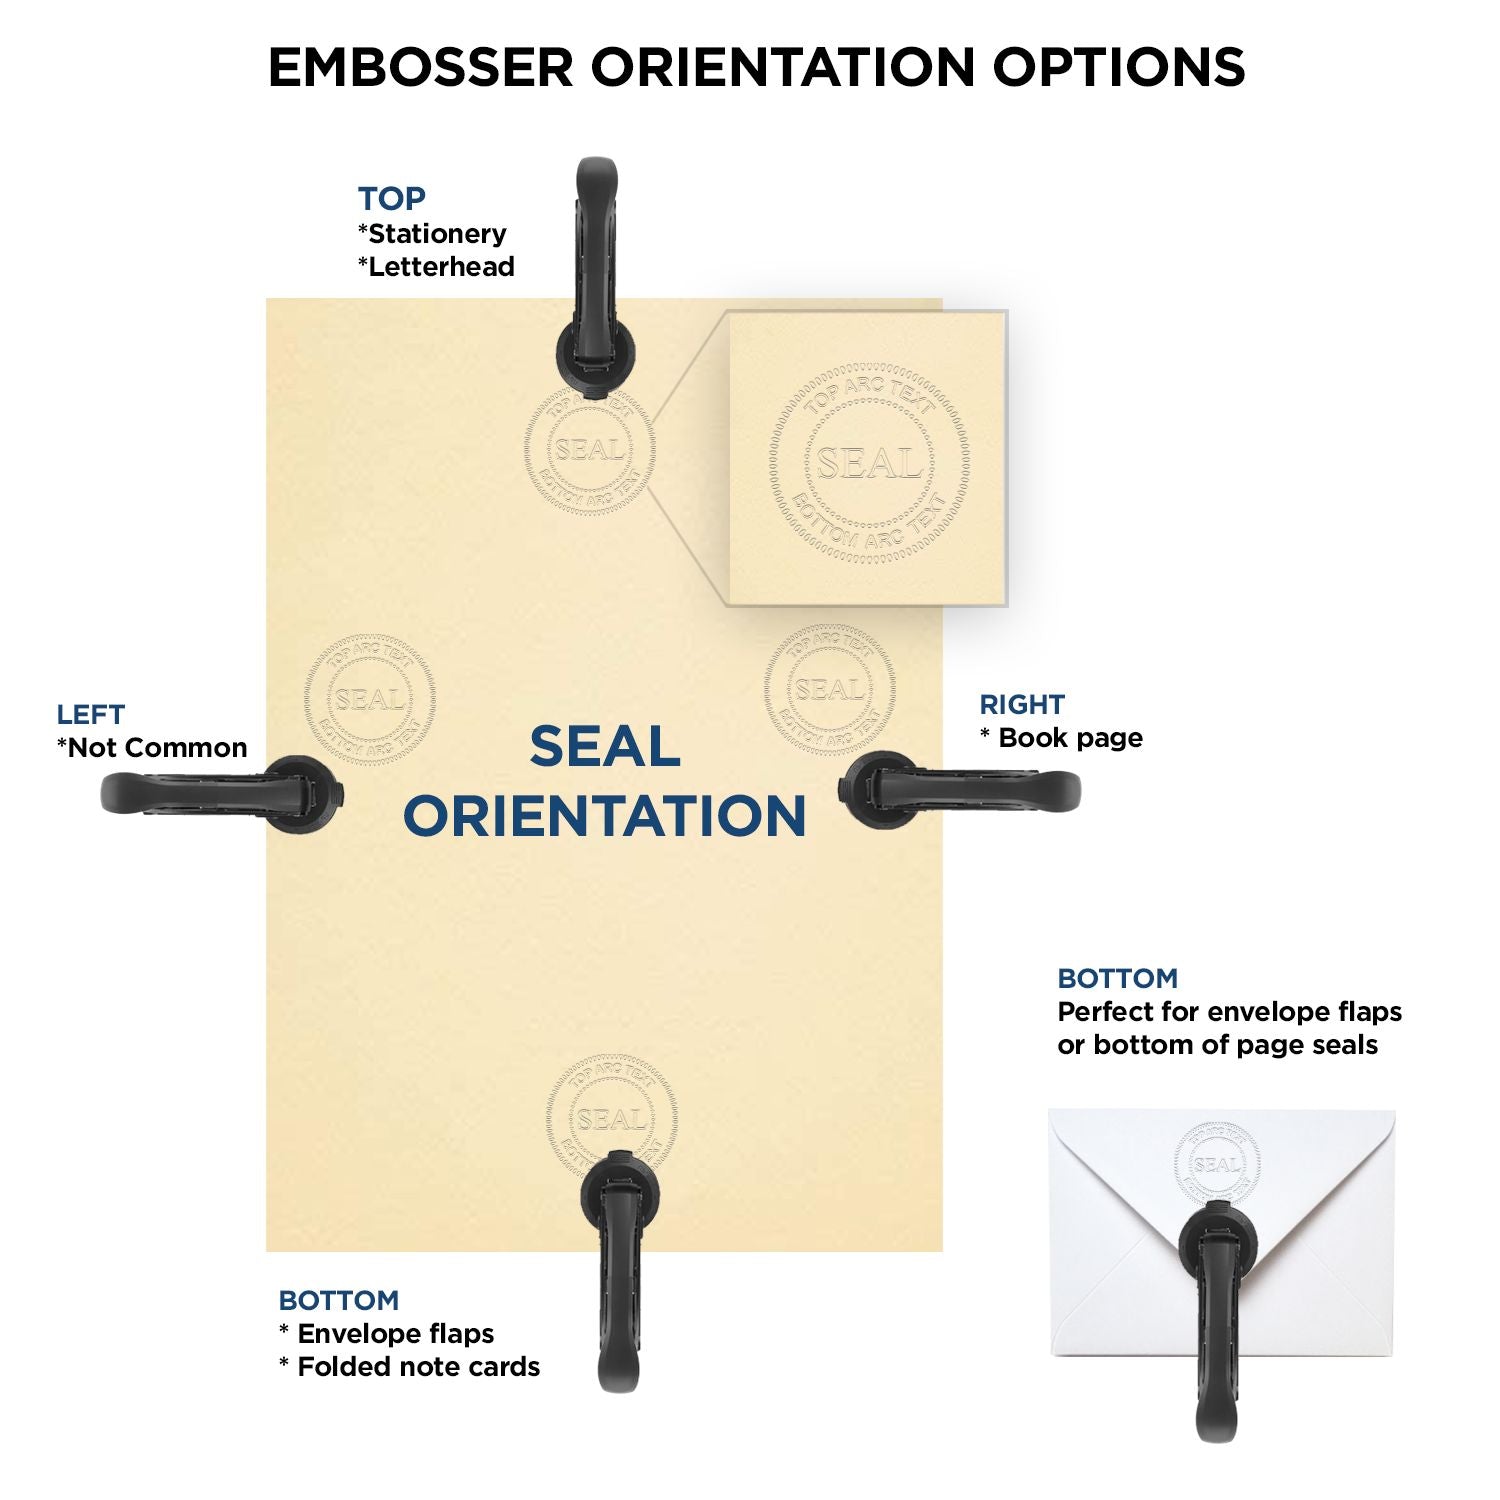 An infographic for the Heavy Duty Cast Iron Utah Engineer Seal Embosser showing embosser orientation, this is showing examples of a top, bottom, right and left insert.